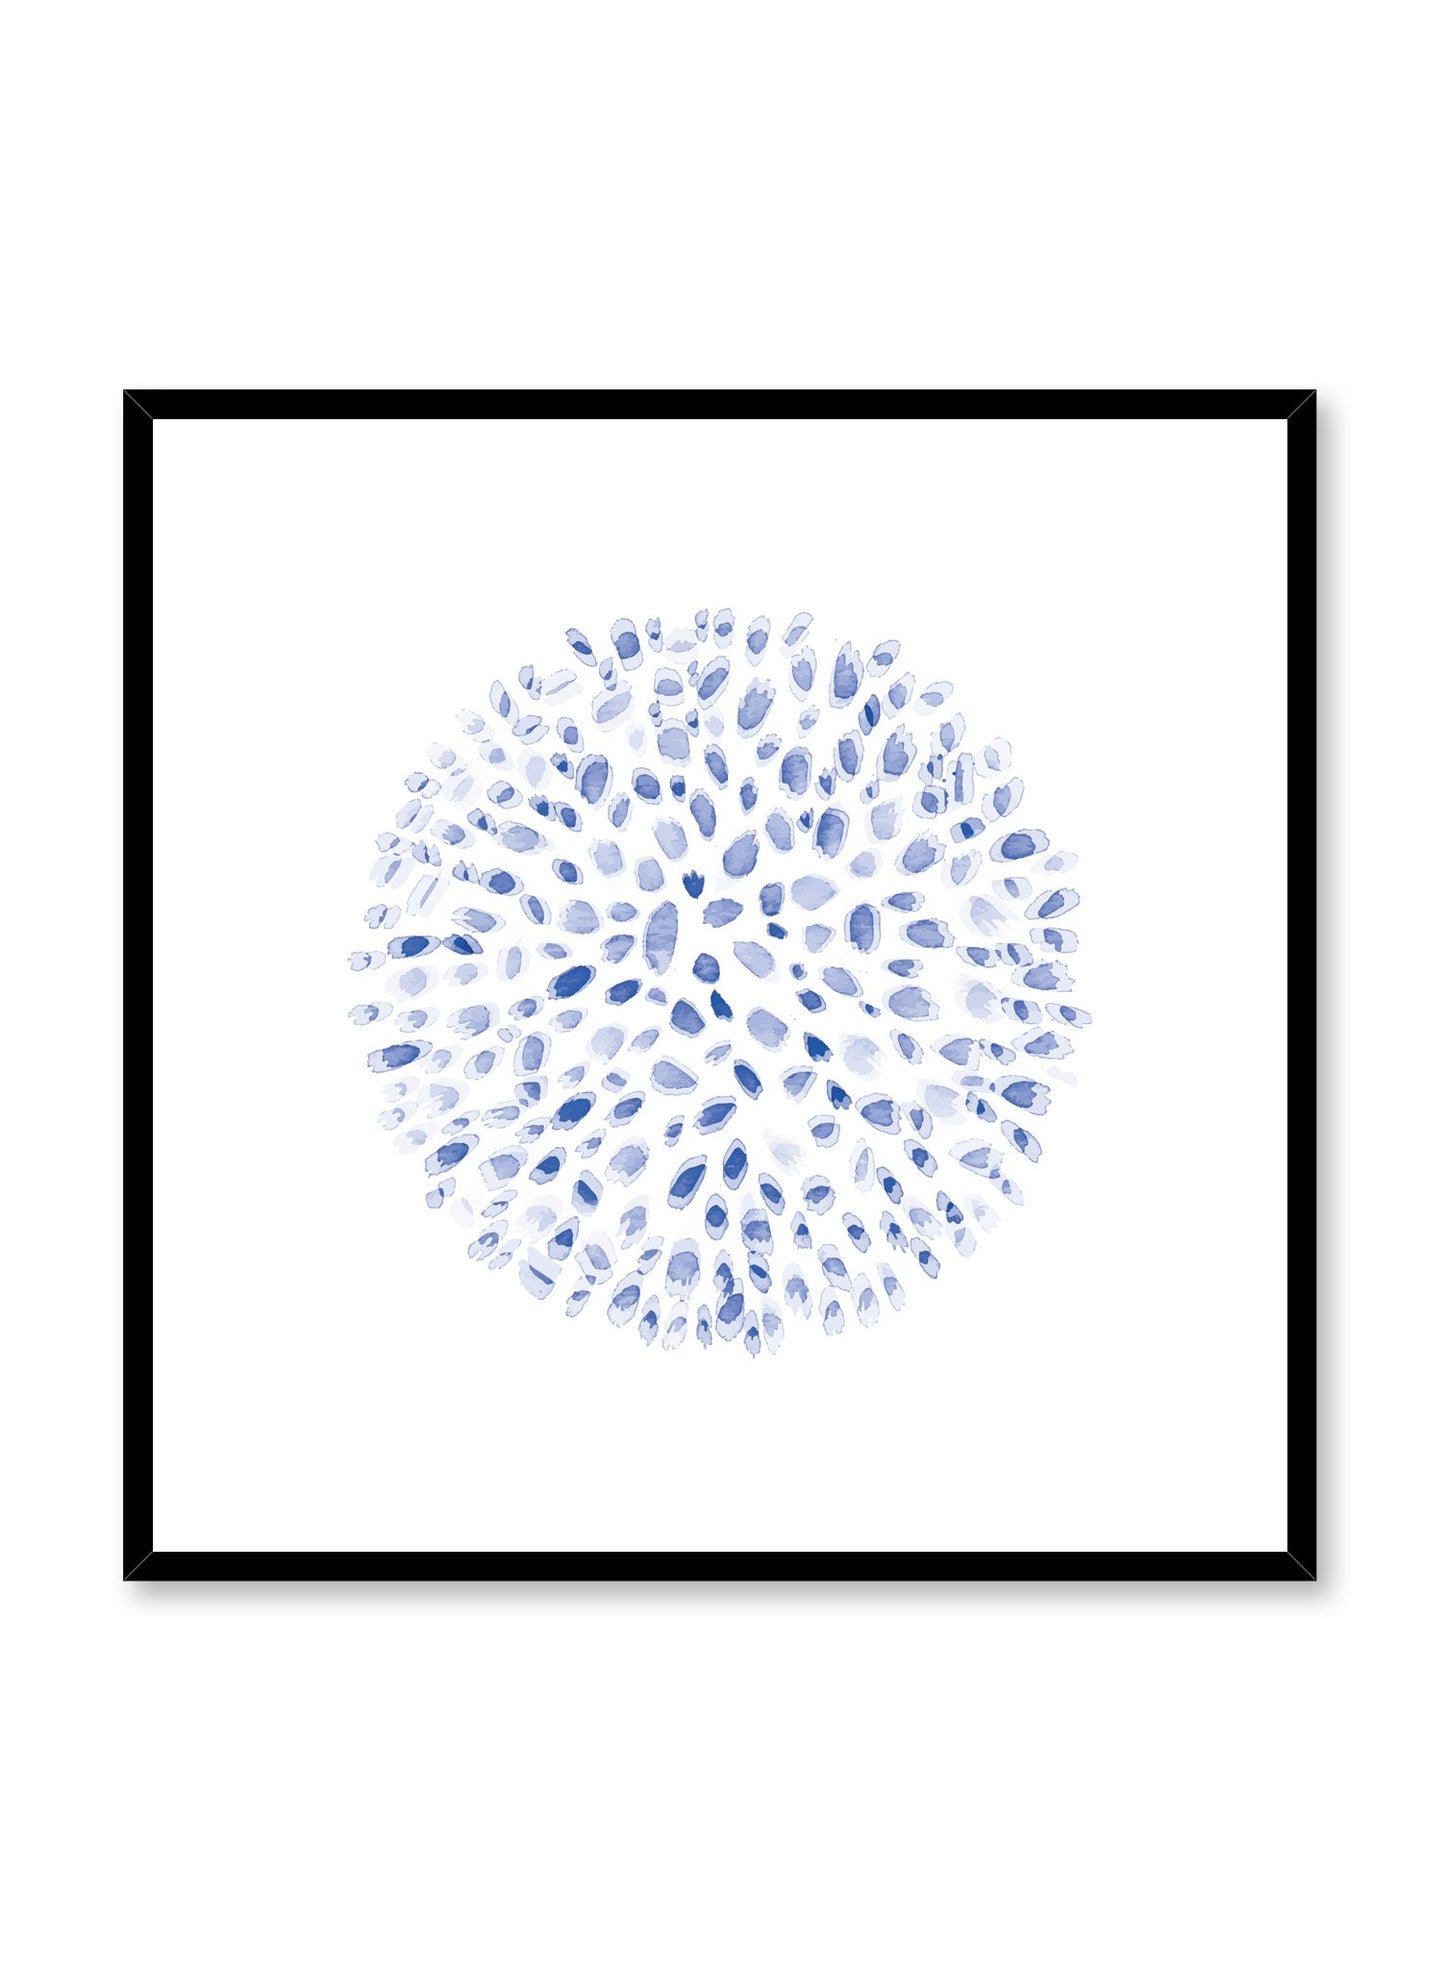 Modern minimalist poster by Opposite Wall with abstract illustration of Blue Dreams in square format